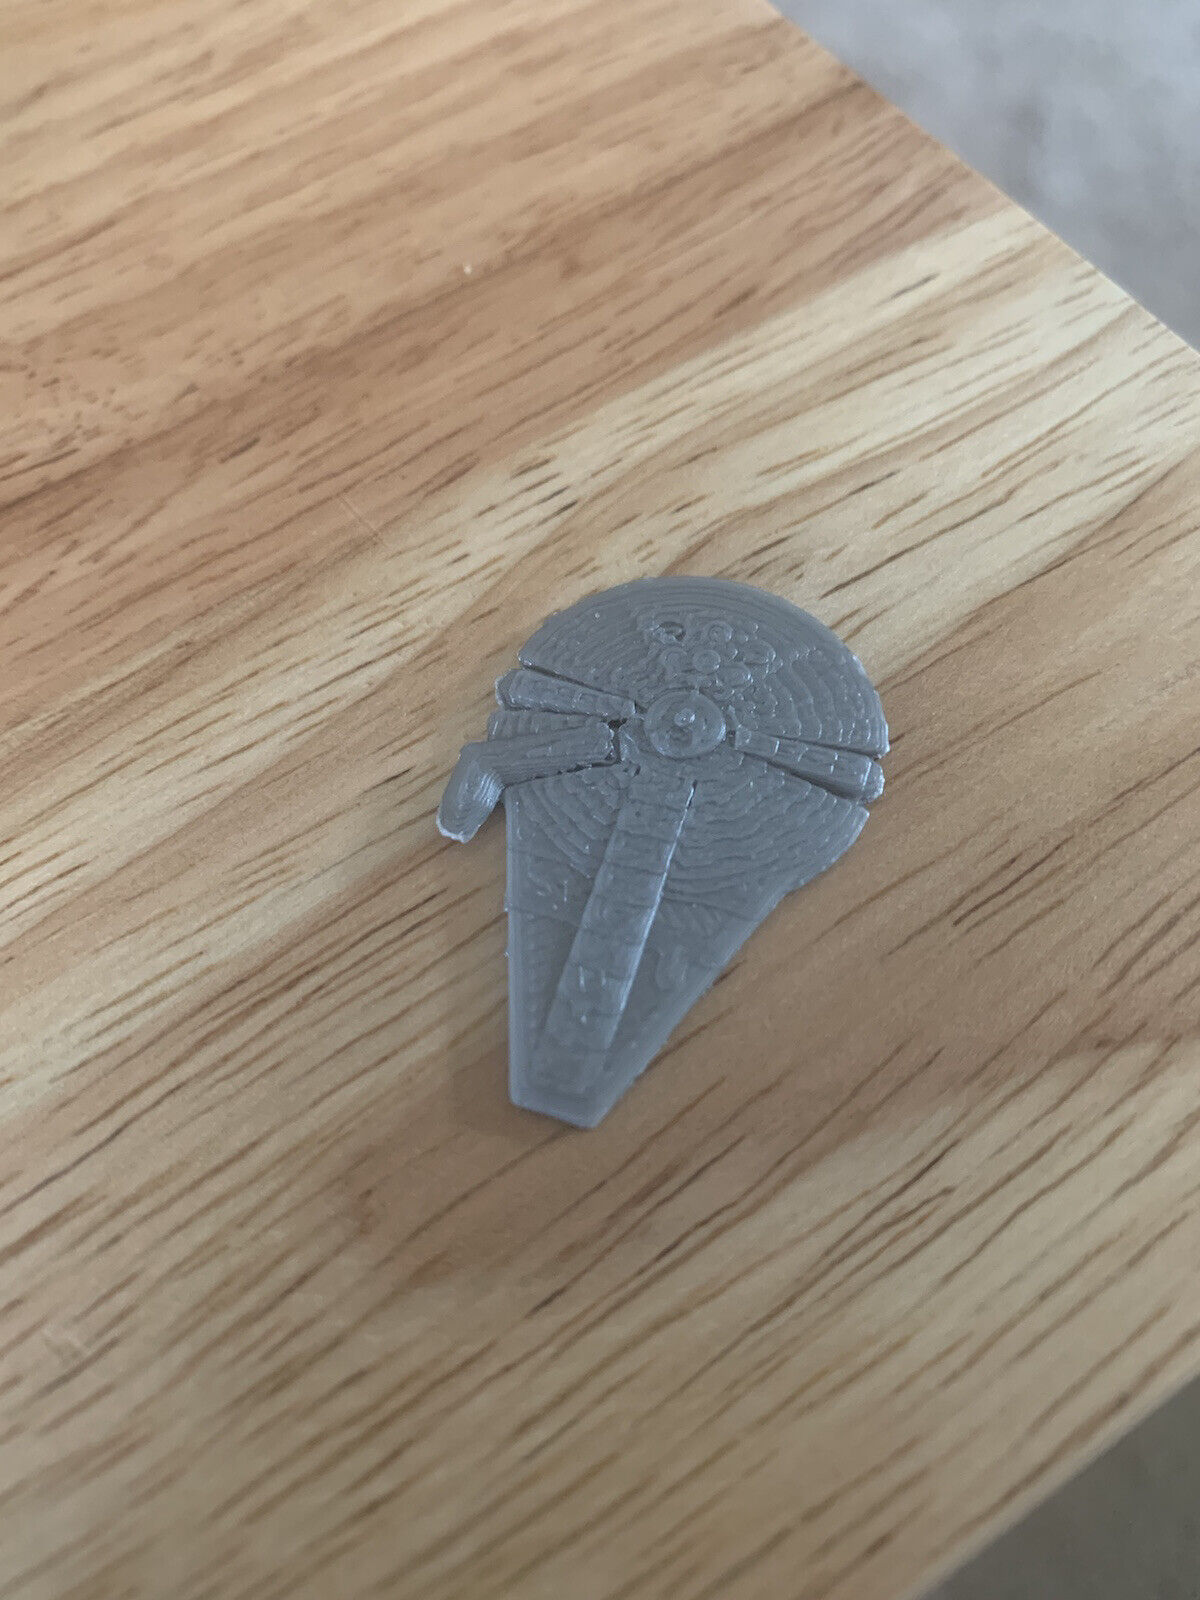 Two (2) Star Wars Inspired Millennium Falcon Guitar Picks From Solo.